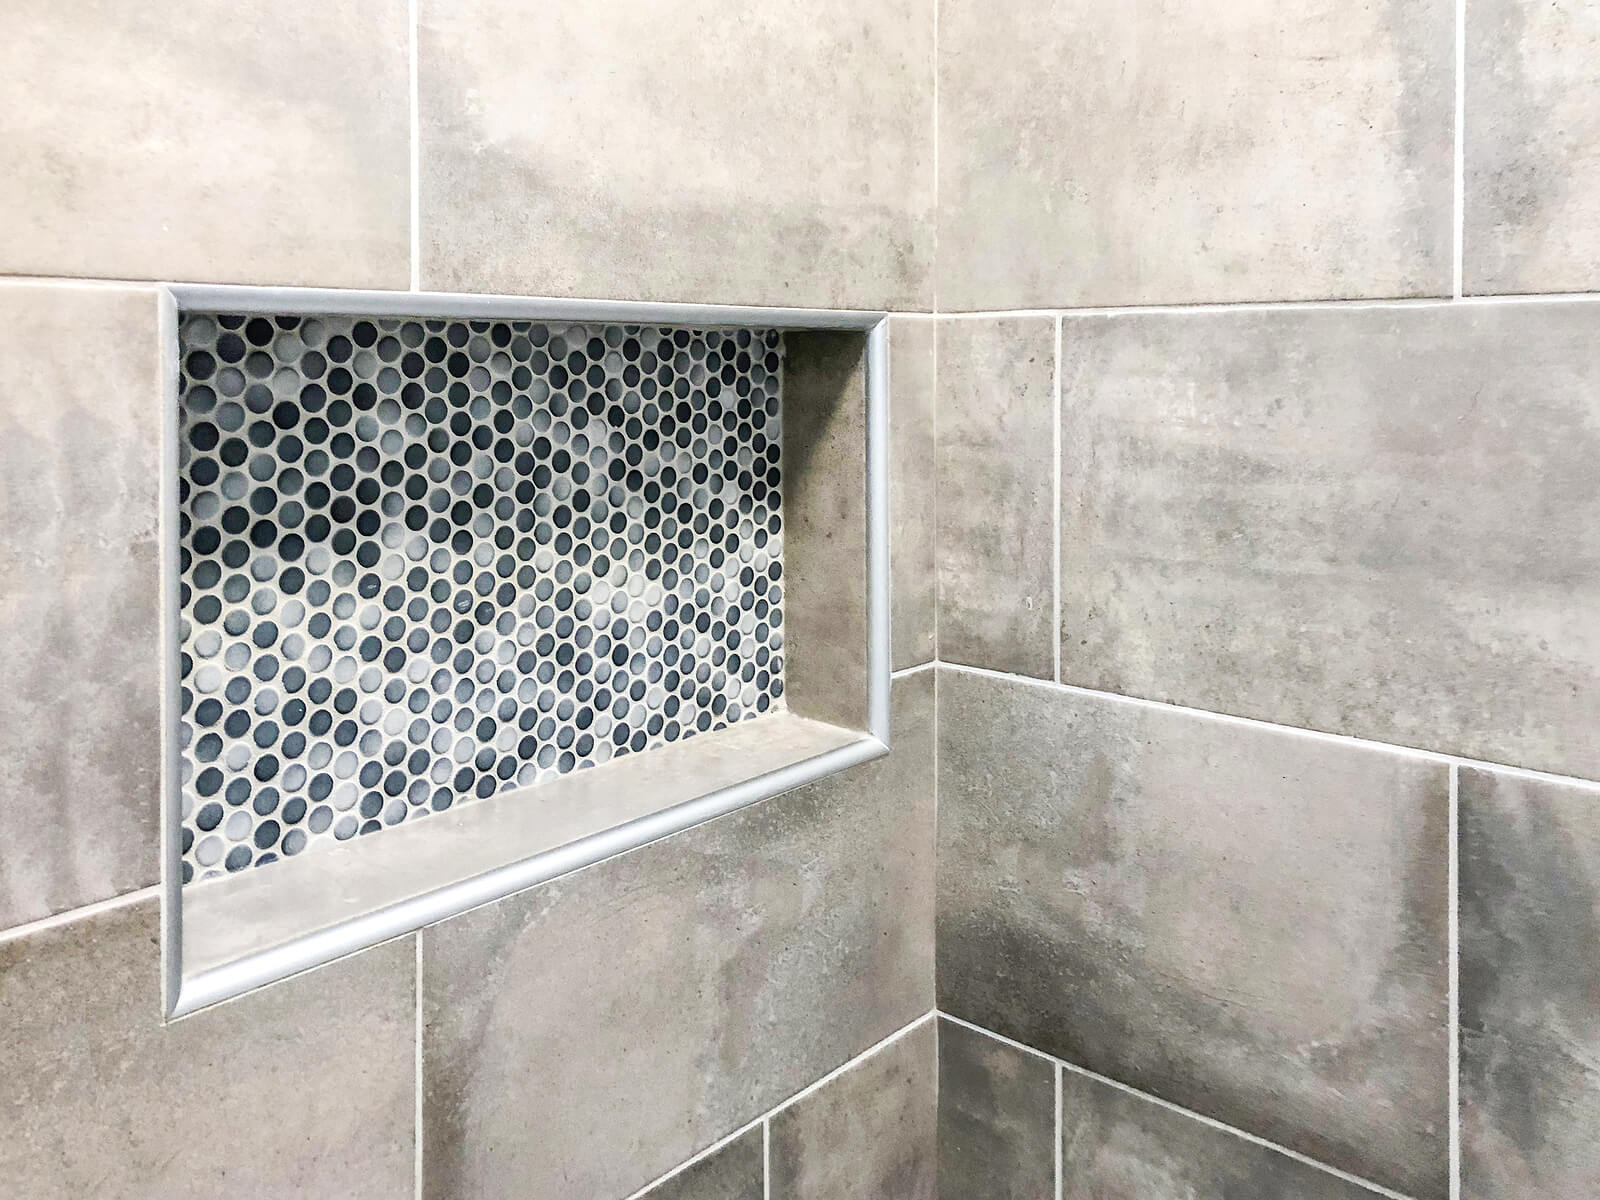 Pro Tips for Cleaning Bathroom Tile Grout - Rick's Plumbing Service, Inc.